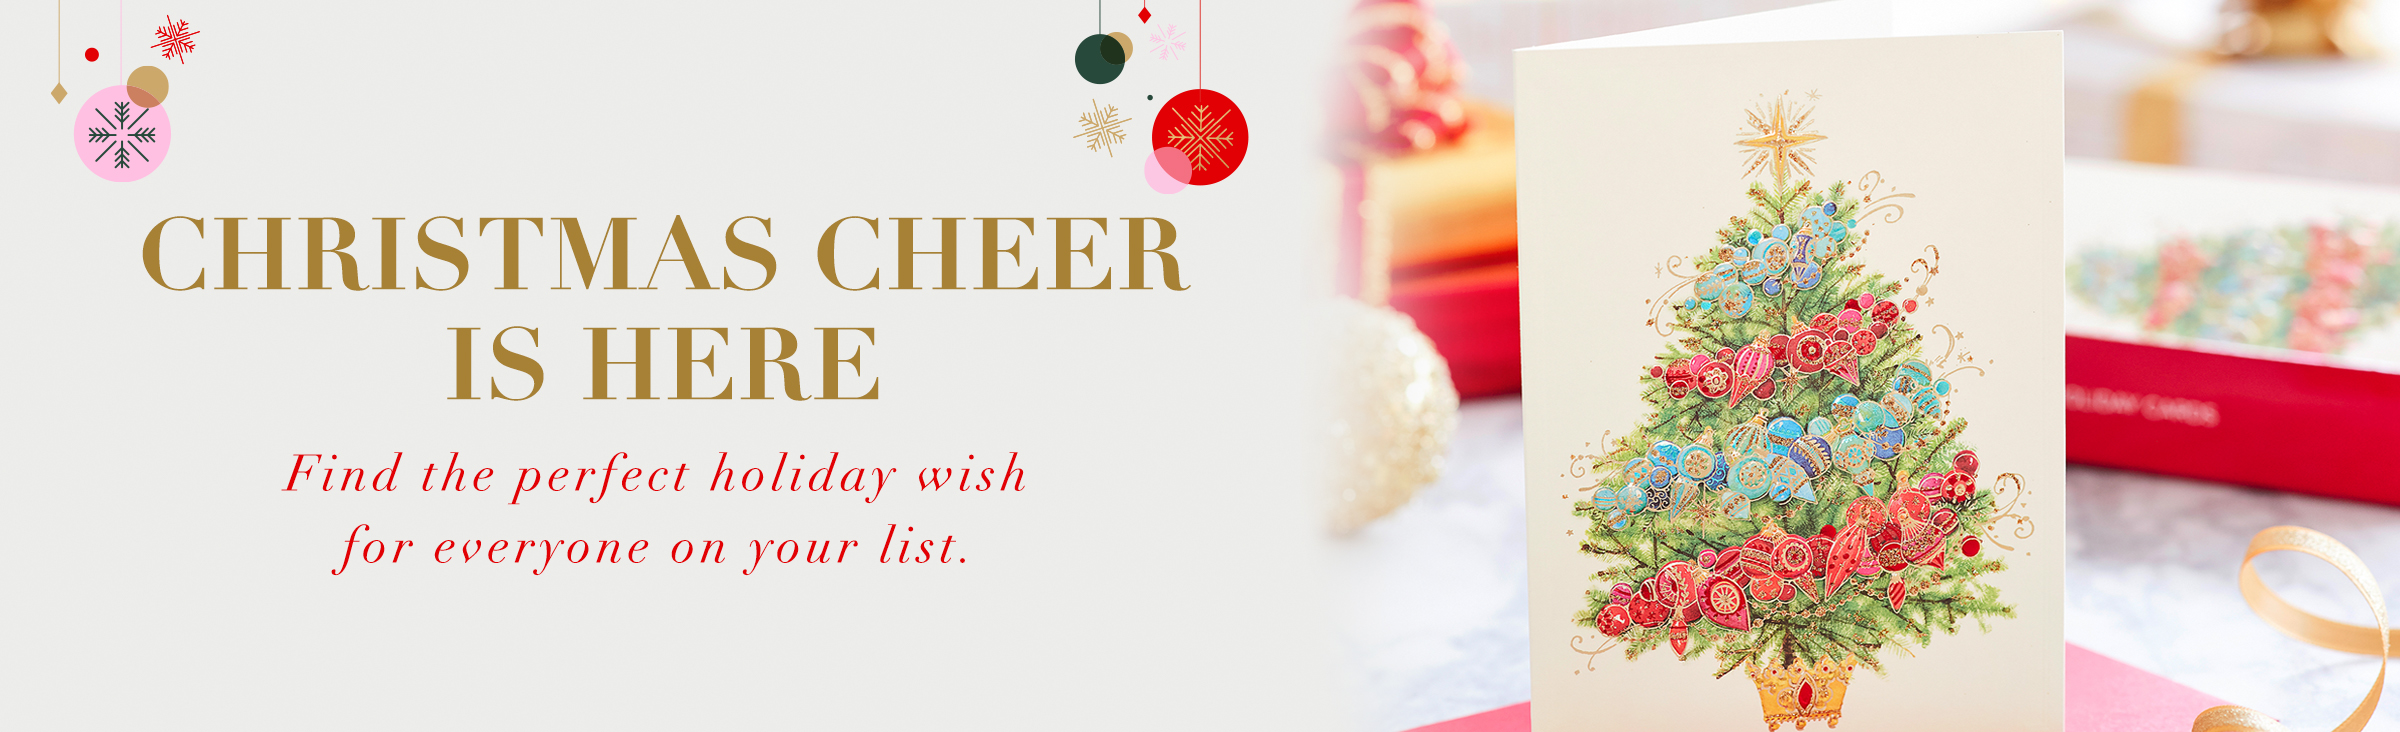 Christamas Cheer is Here Find the perfect holiday wish for everyone on your list